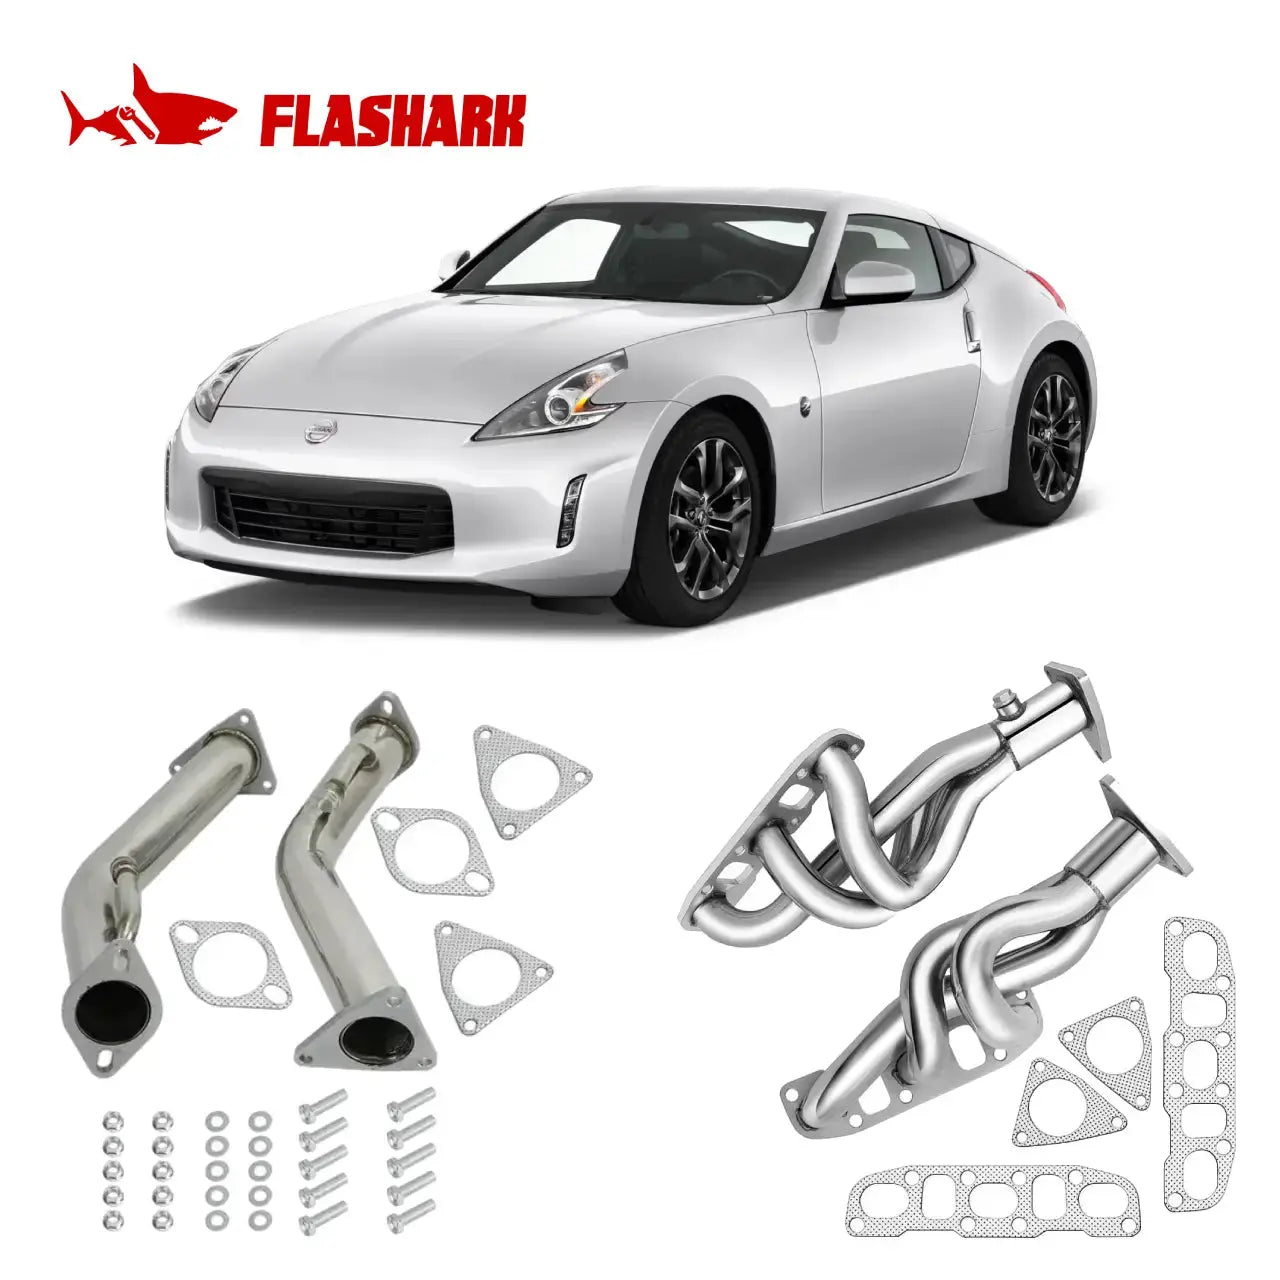 Exhaust Header/Downpipe Exhaust All-In-One Kit for 2009-2013 Nissan 370Z /Infiniti G37 G37X G37XS 3.7L Flashark